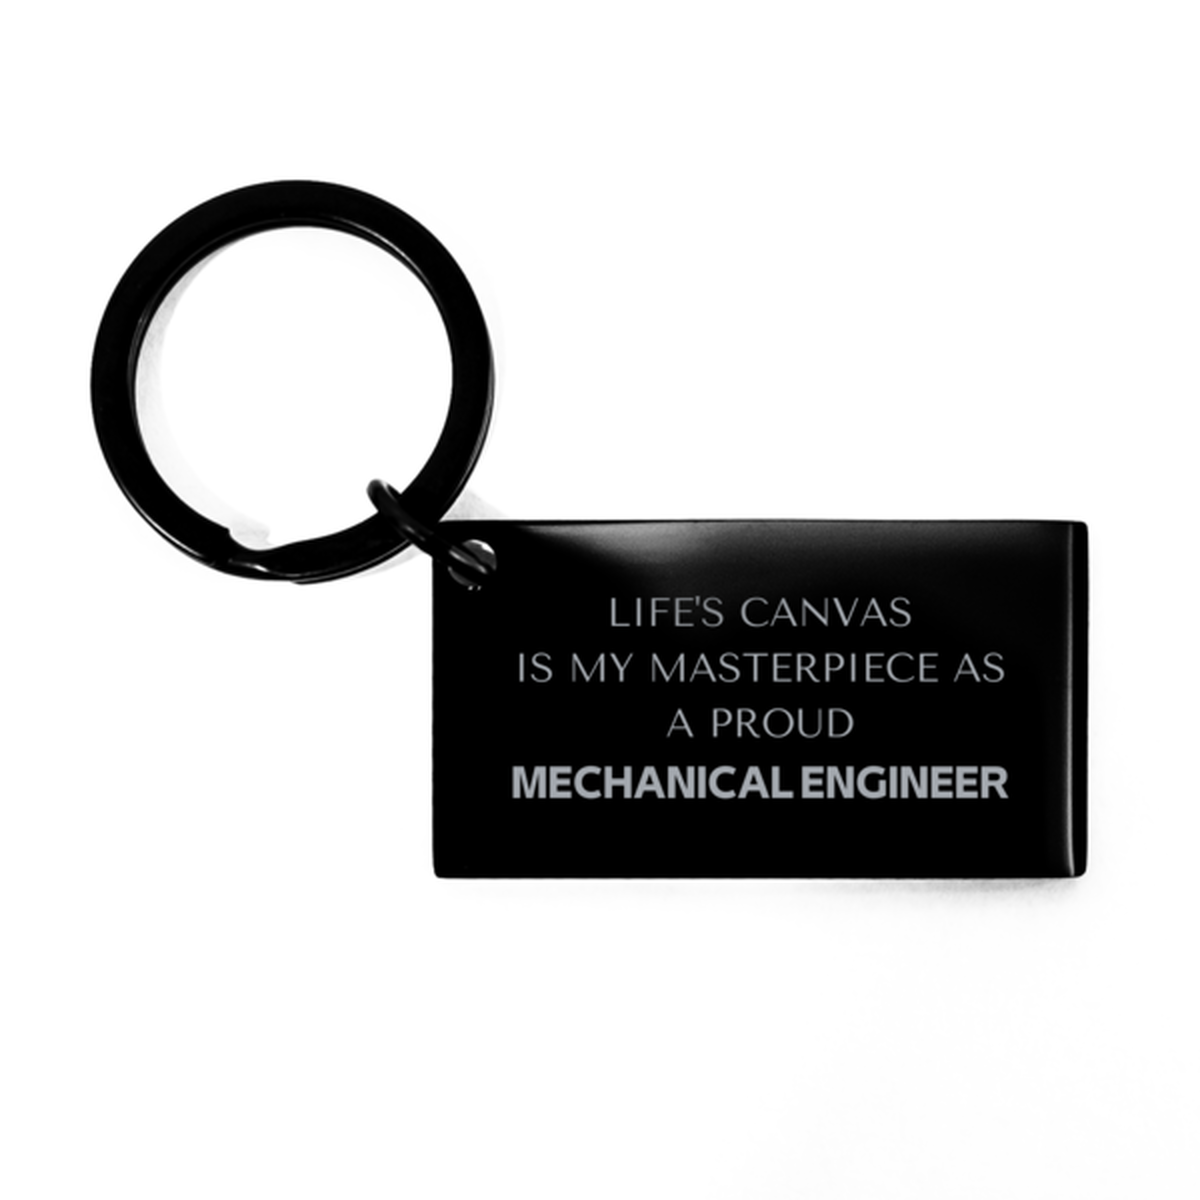 Proud Mechanical Engineer Gifts, Life's canvas is my masterpiece, Epic Birthday Christmas Unique Keychain For Mechanical Engineer, Coworkers, Men, Women, Friends